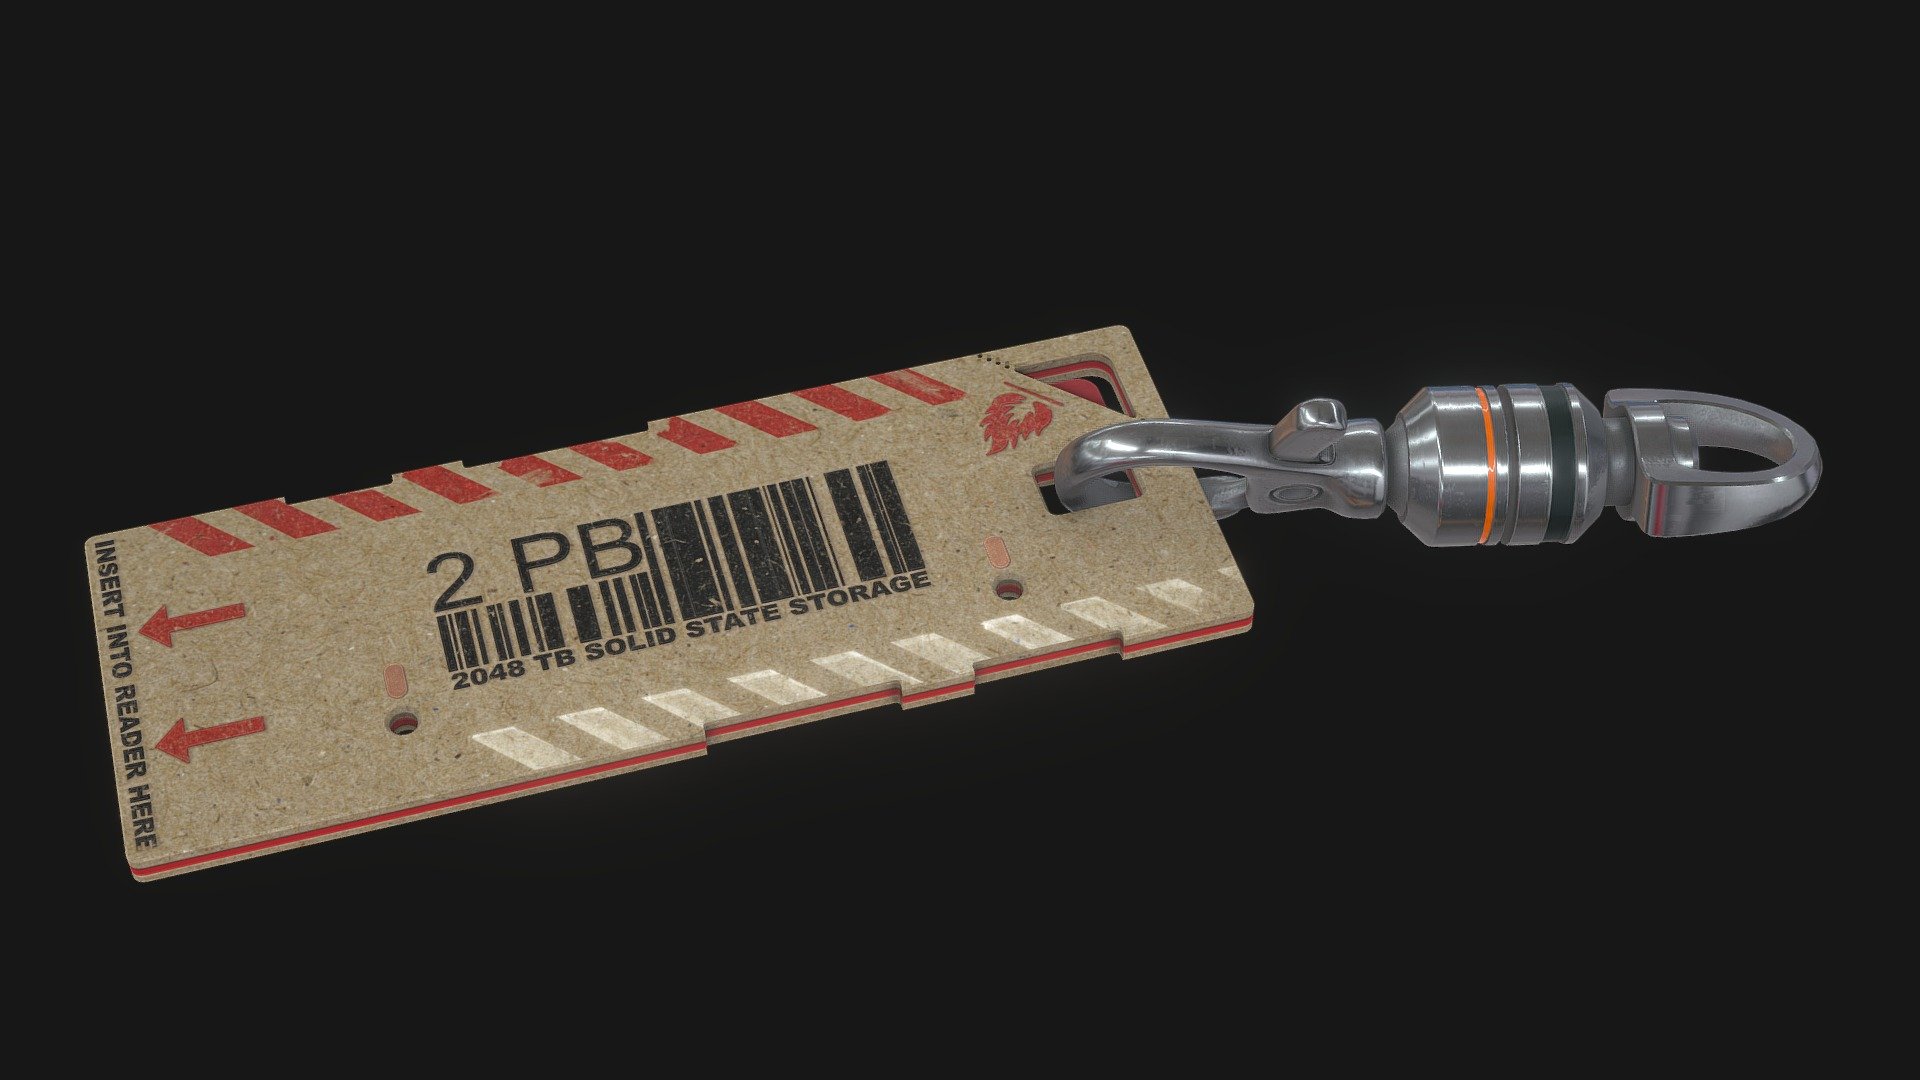 From the 2019 Film Ad Astra

This was a fun prop to work on, what started out as simple USB stick of sorts, developed into this disosable drive. The final design is based on pre-computer CIA burn bags, where agents would dispose of classified documents. To destroy the drive, a strike-anywhere corner can be struck on most rough surfaces.

See more design work I did for the film: https://alexjcunningham.com/Ad-Astra - Disposable Data Drive - Ad Astra (2019) - Download Free 3D model by AlexCunningham 3d model